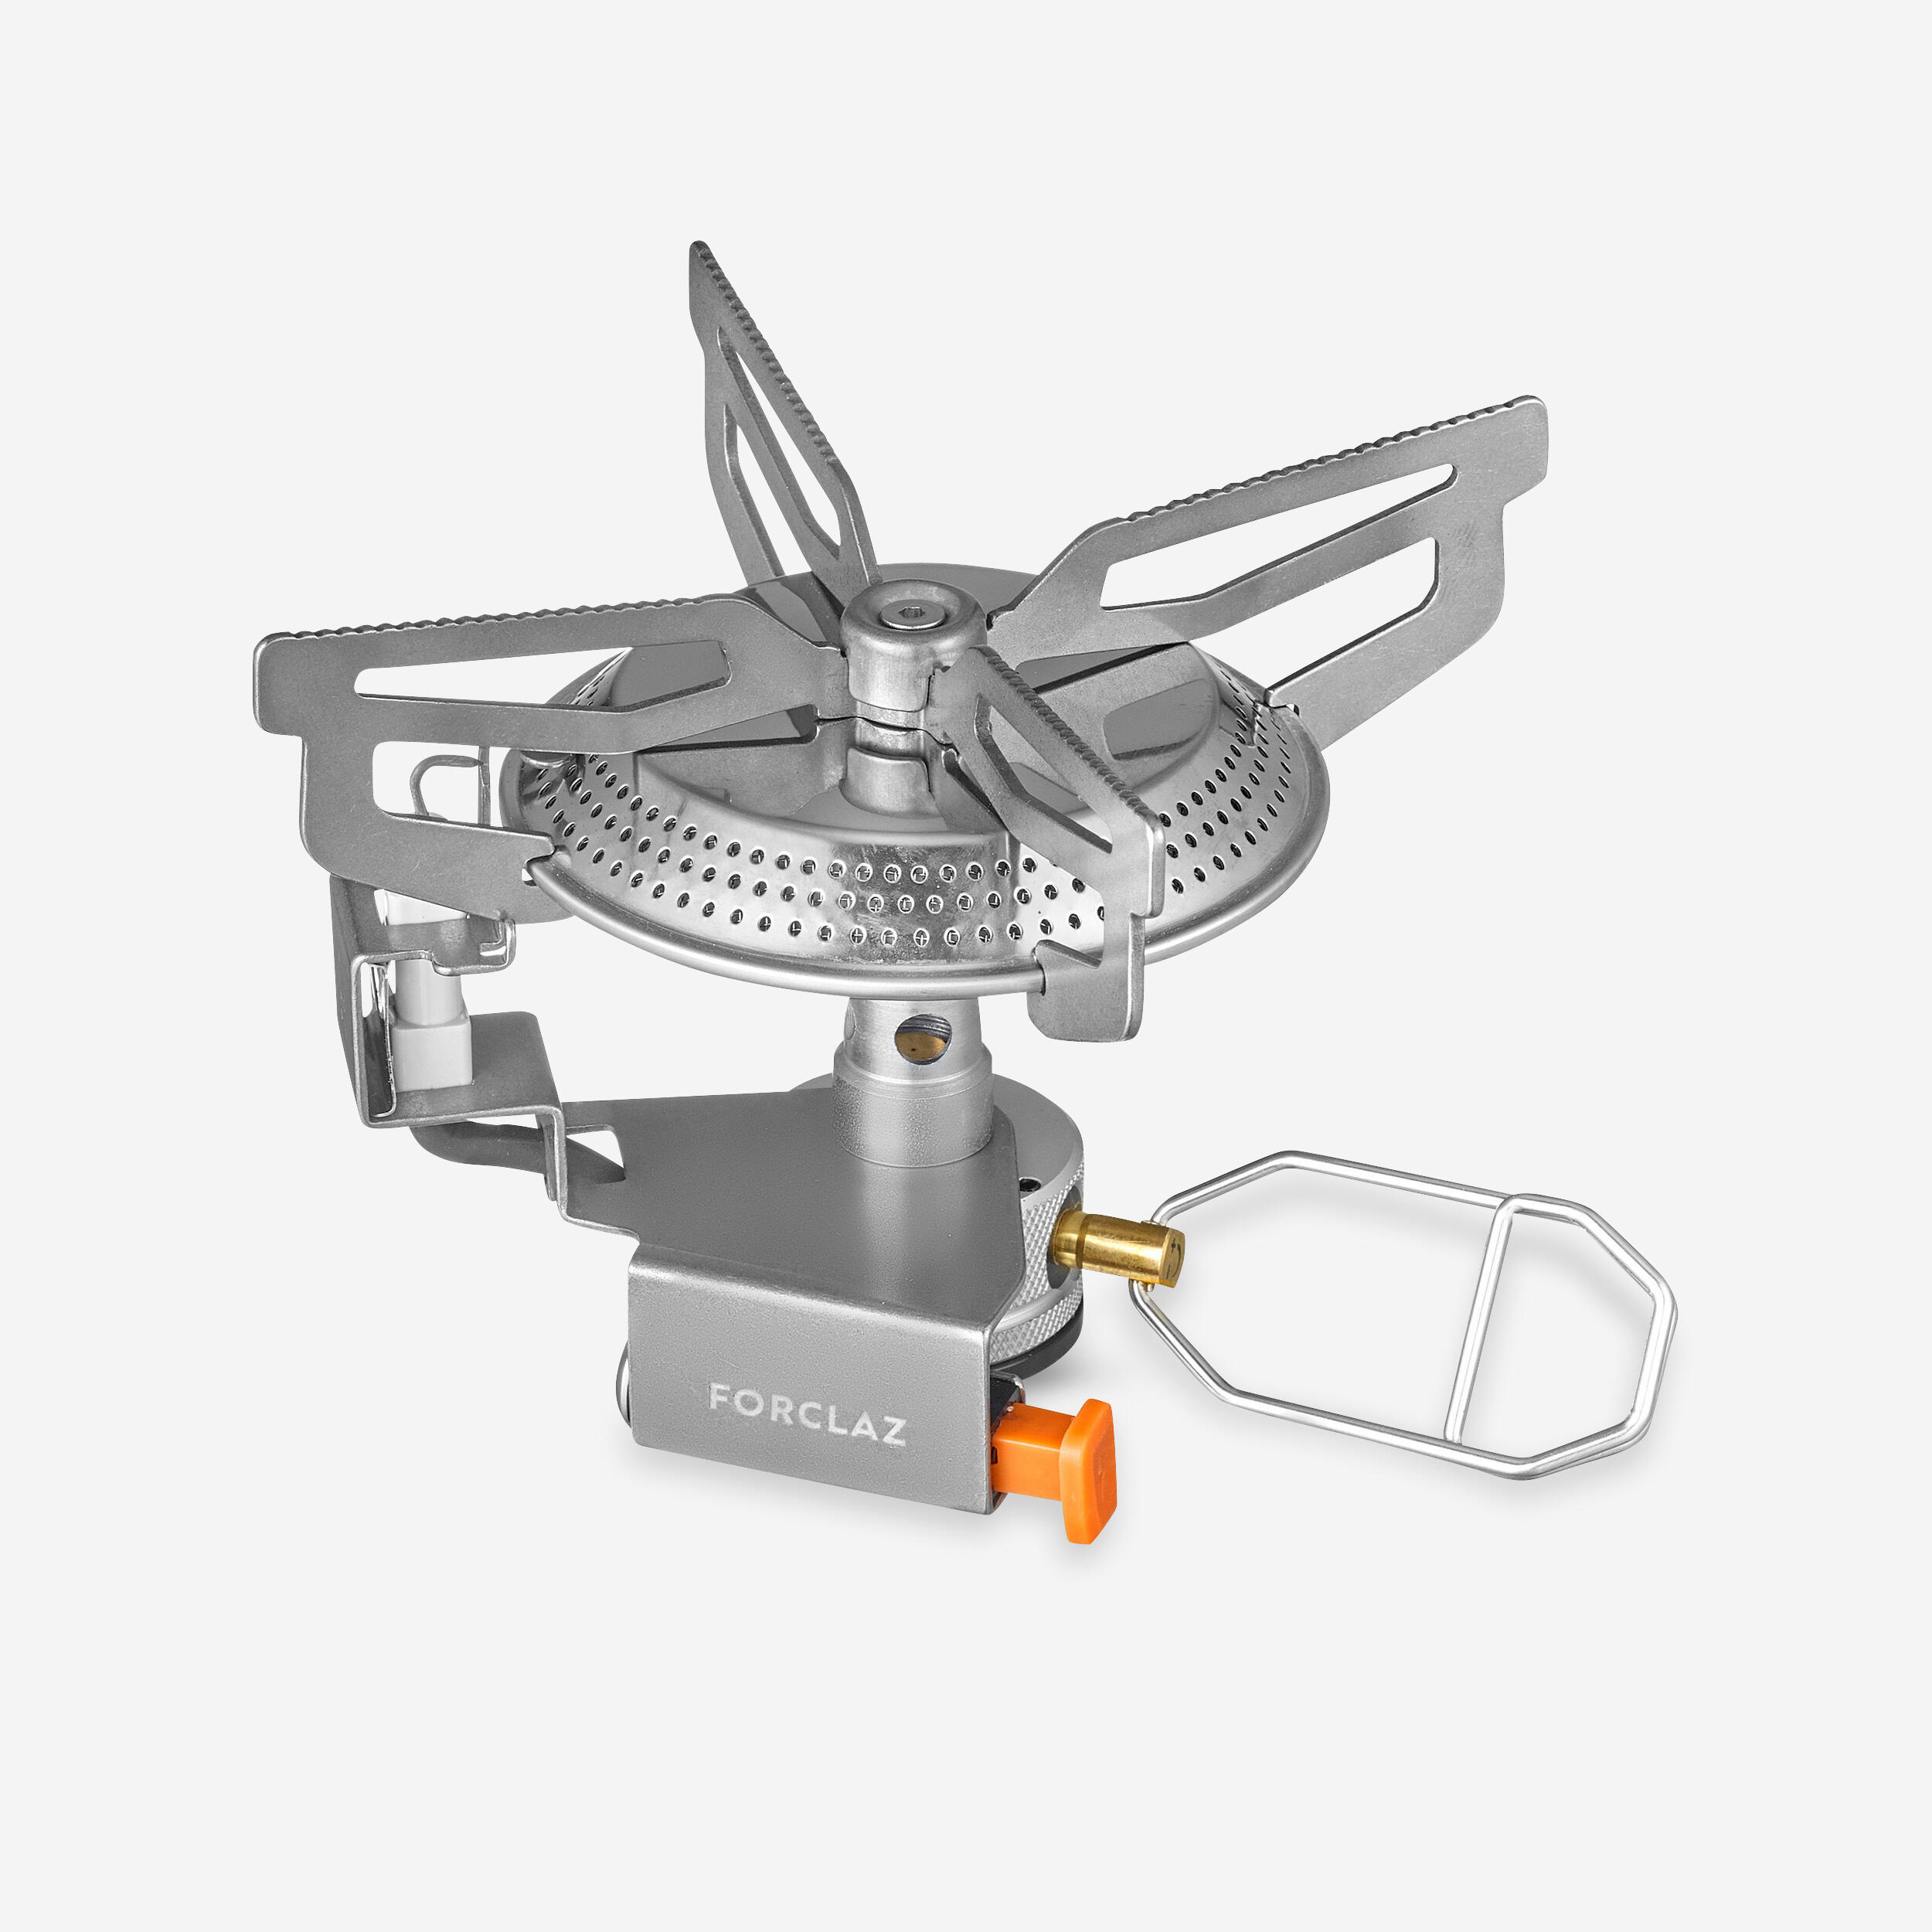 Gas stove with lighter - MT100 1/9